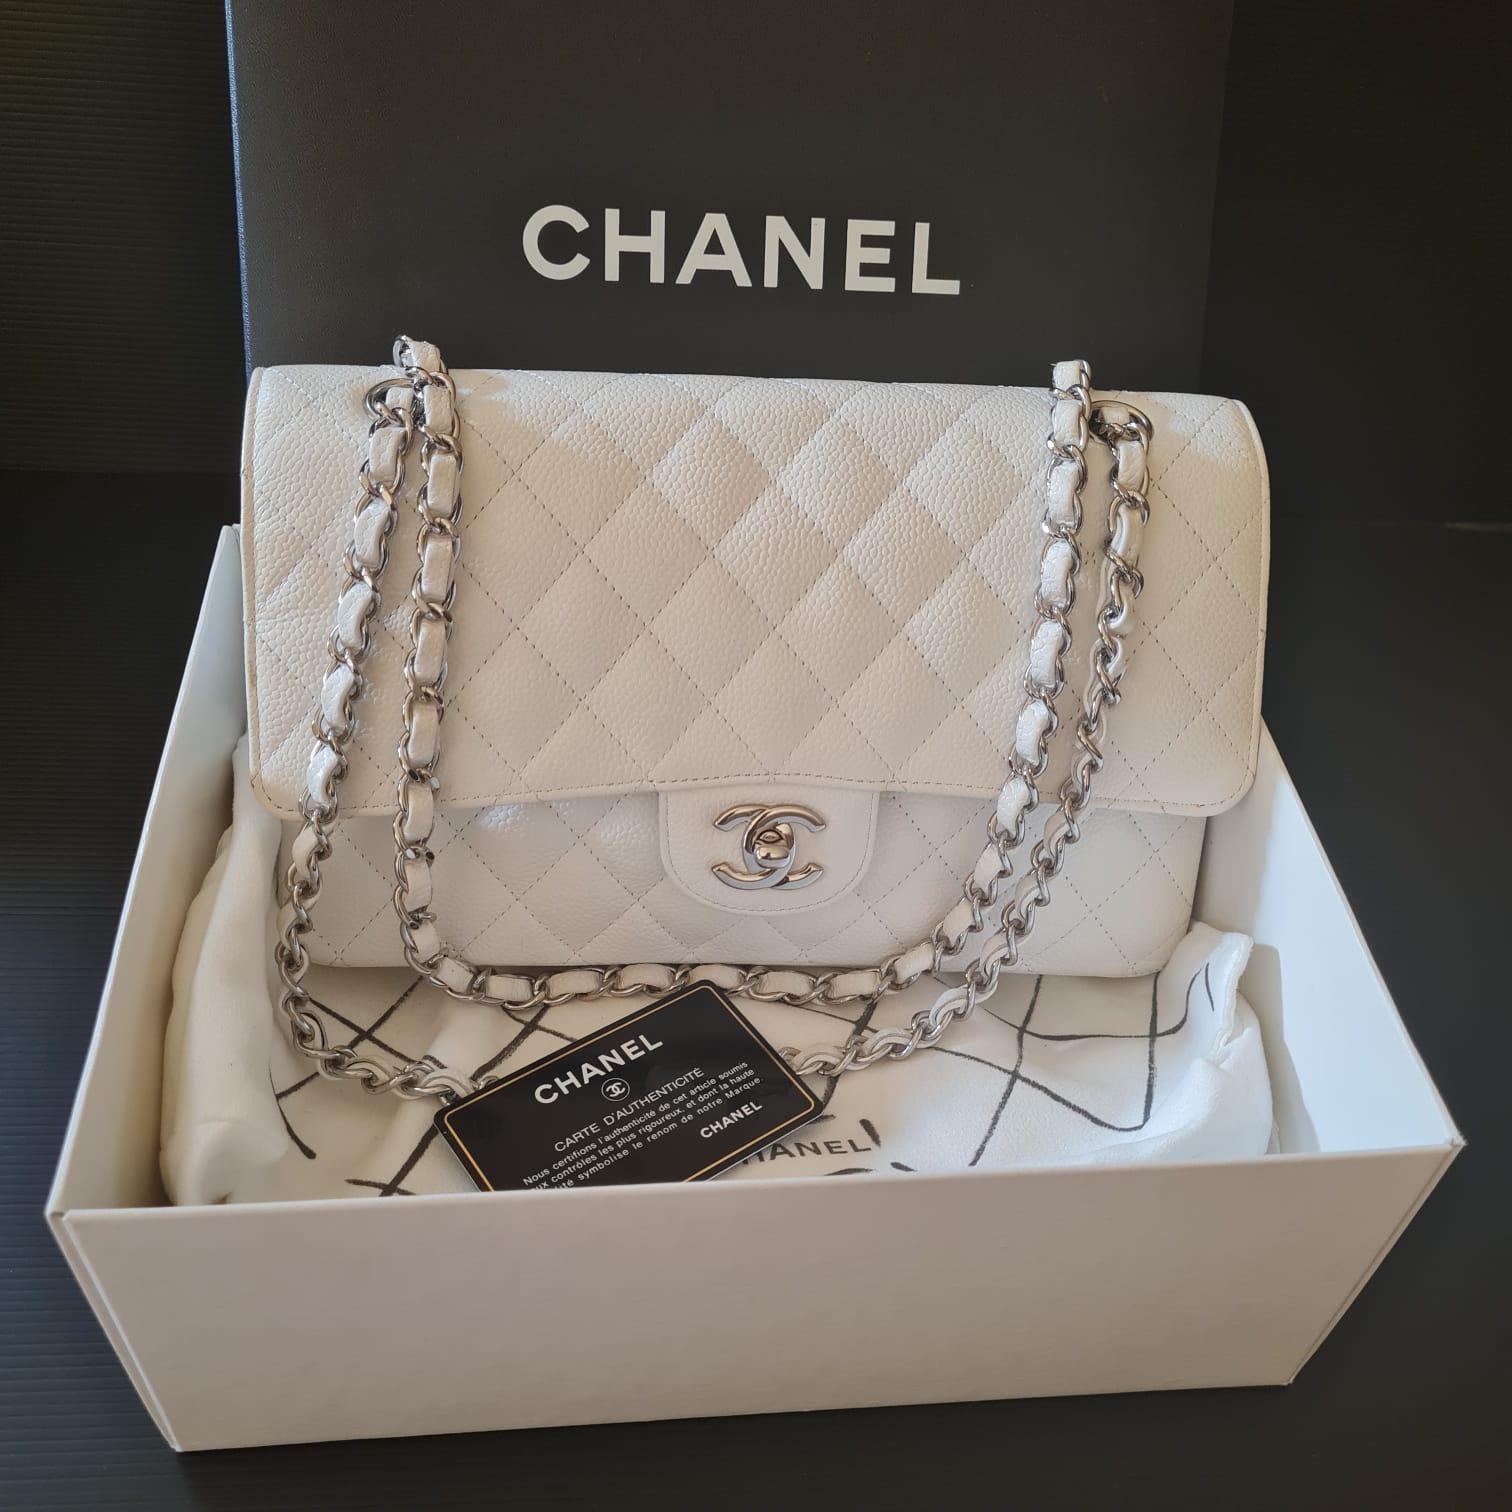 Chanel medium caviar in white colour silver hardware.

The bag is still in very good condition, with gentle signs of usage. The bag is still in its original condition. 

Inclusion: Authenticity Card, Dust Bag, Box

Serial Number: #16334440